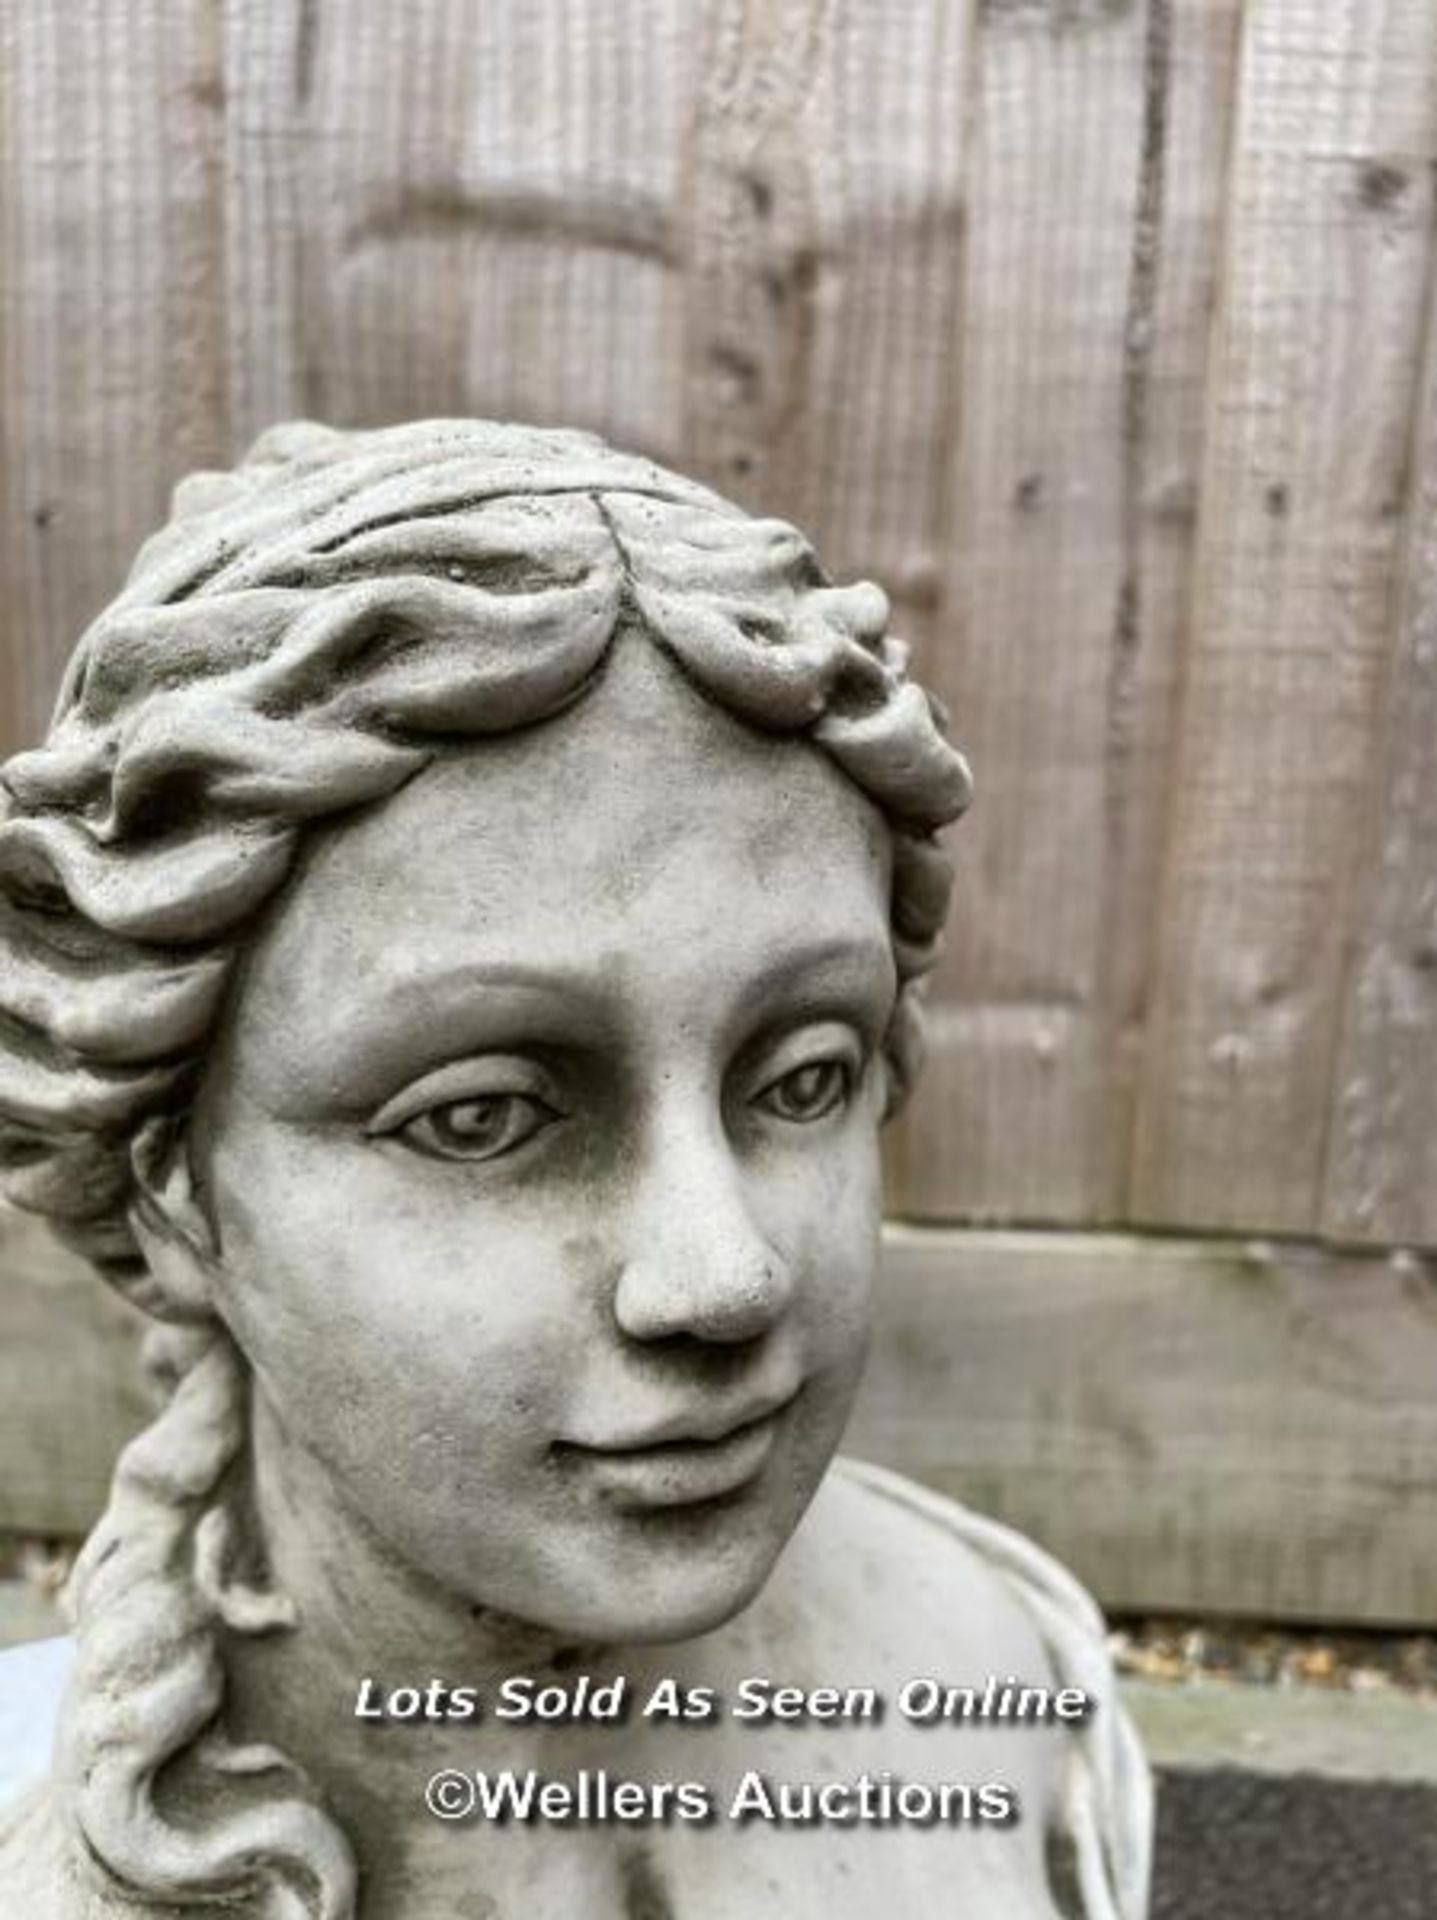 STONE FRENCH MAID BUST, 42CM (H) / ITEM LOCATION: GUILDFORD, GU14SJ (WELLERS AUCTIONS) - Image 2 of 2